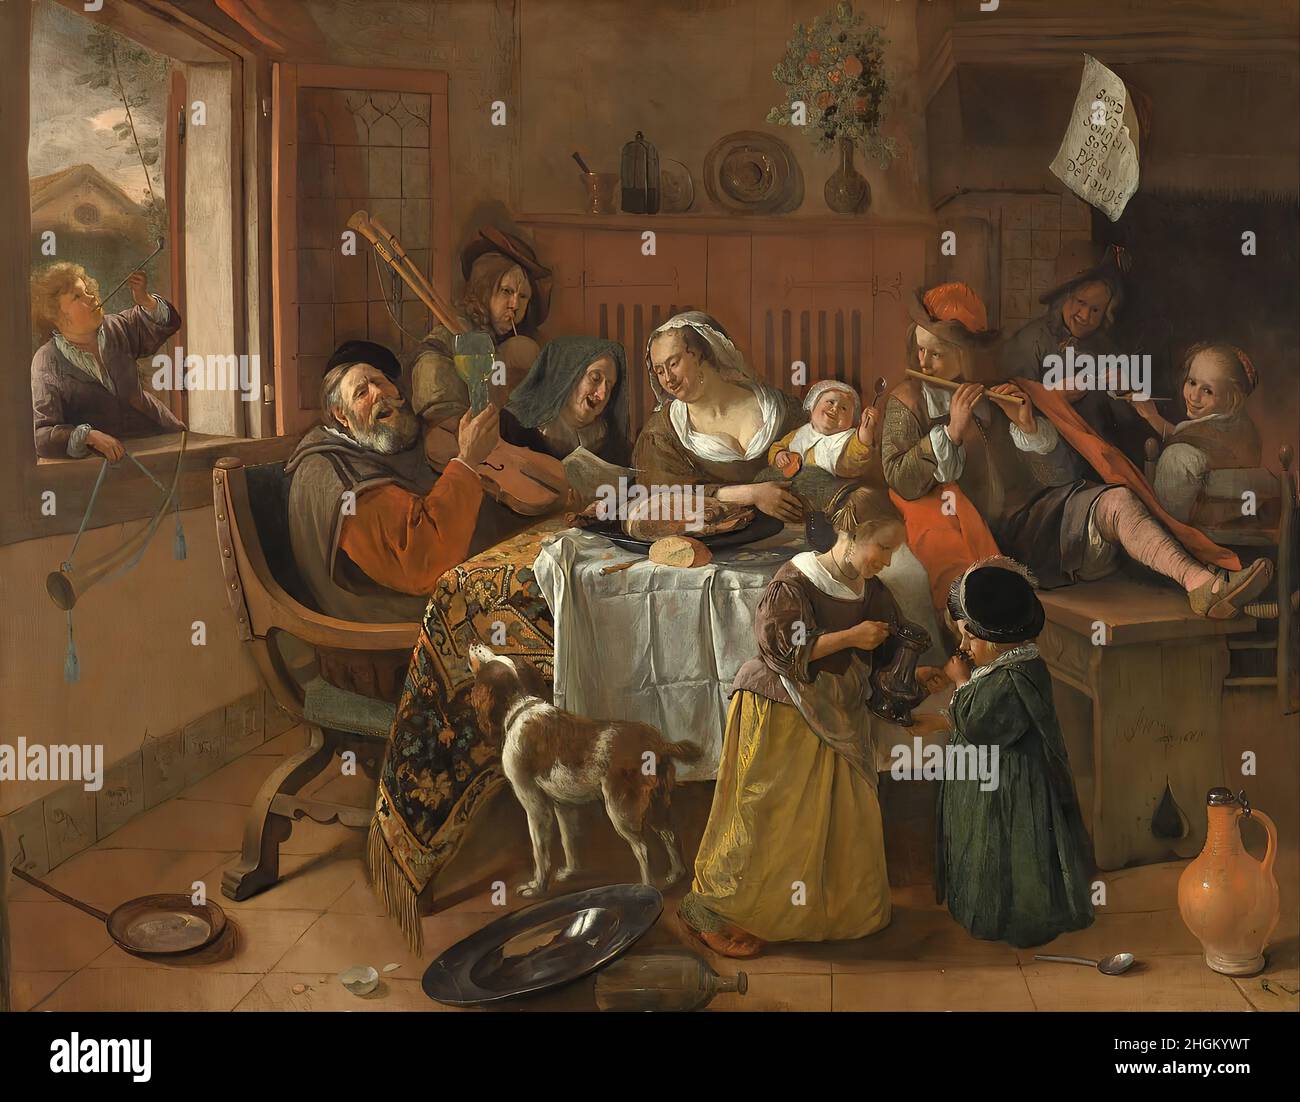 The merry family - 1668 - Oil on canvas 141 x 110,5 cm - Steen Jan Stock Photo